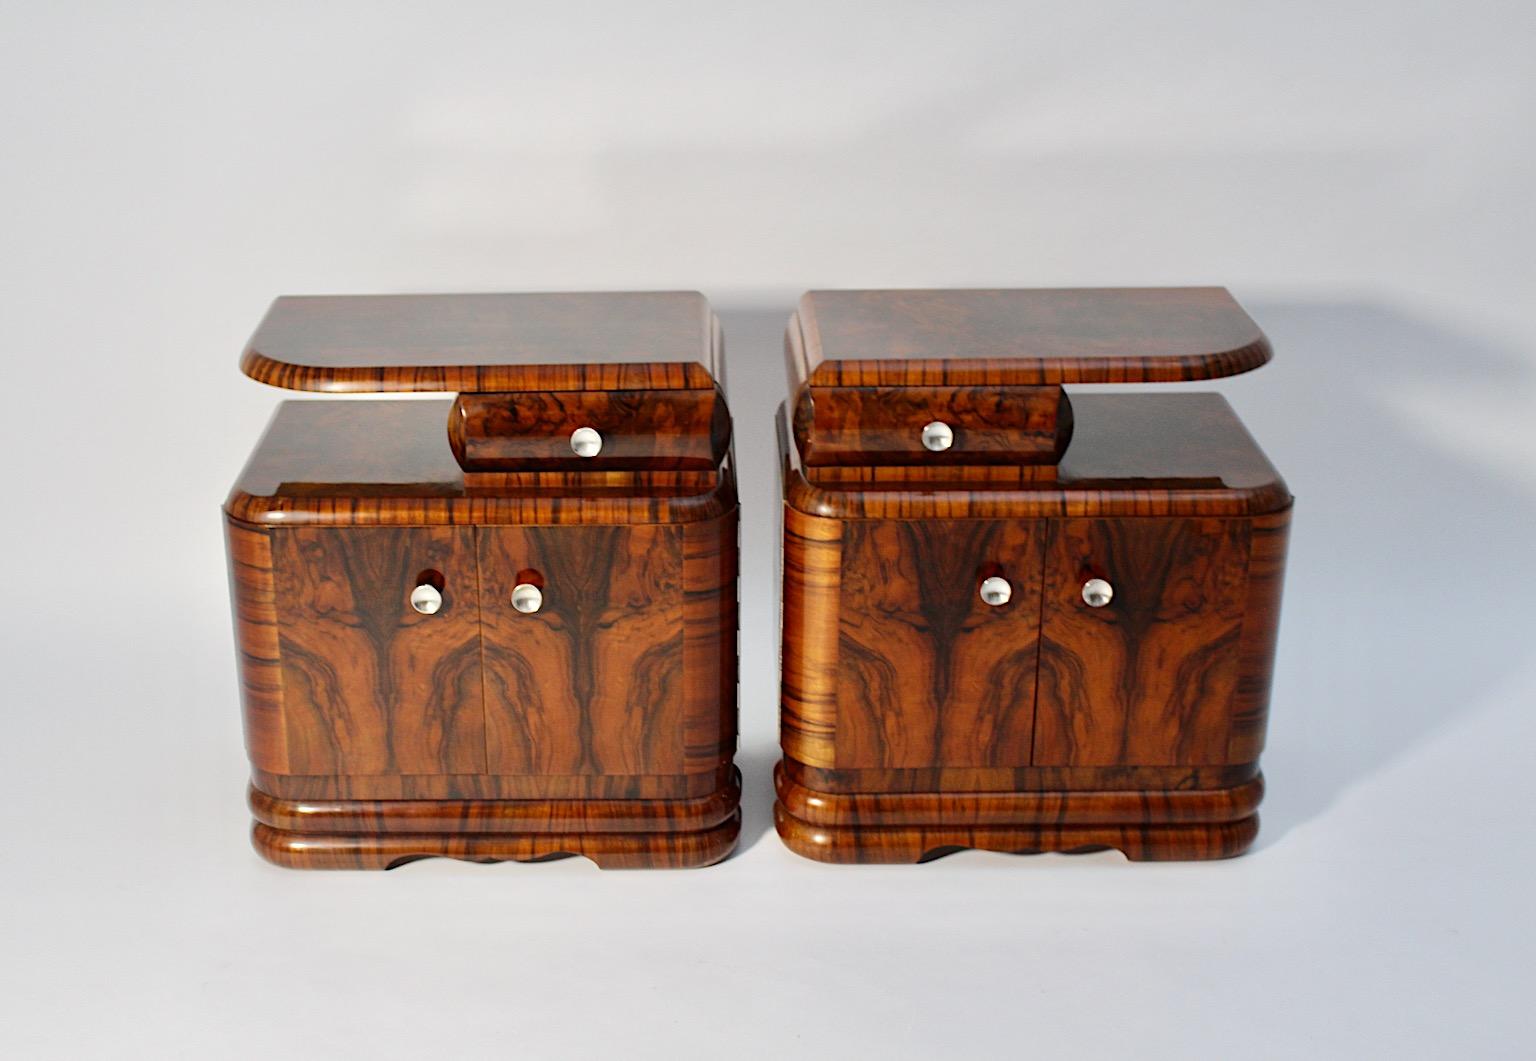 Art Deco vintage pair duo nightstands from walnut and nickel, 1930s Vienna.
An elegant pair duo of nightstands from lively walnut veneer in warm chocolate brown color in a stunning curved shape.
These nightstands feature at the upper part one drawer